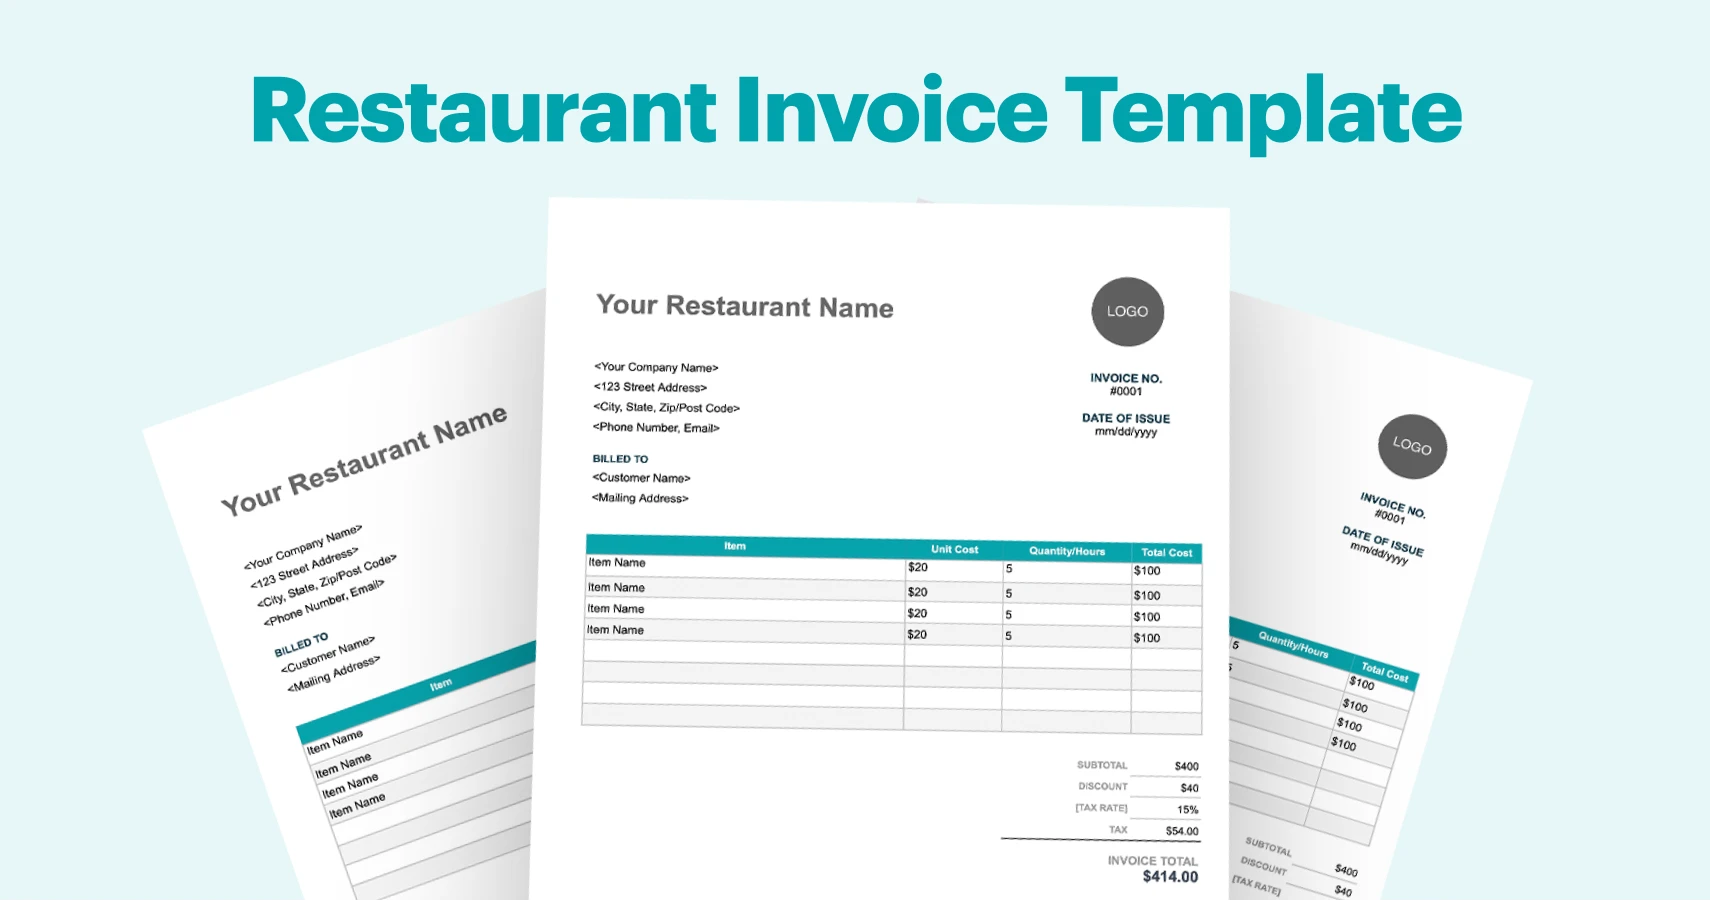 Restaurant Invoice Template Free Download